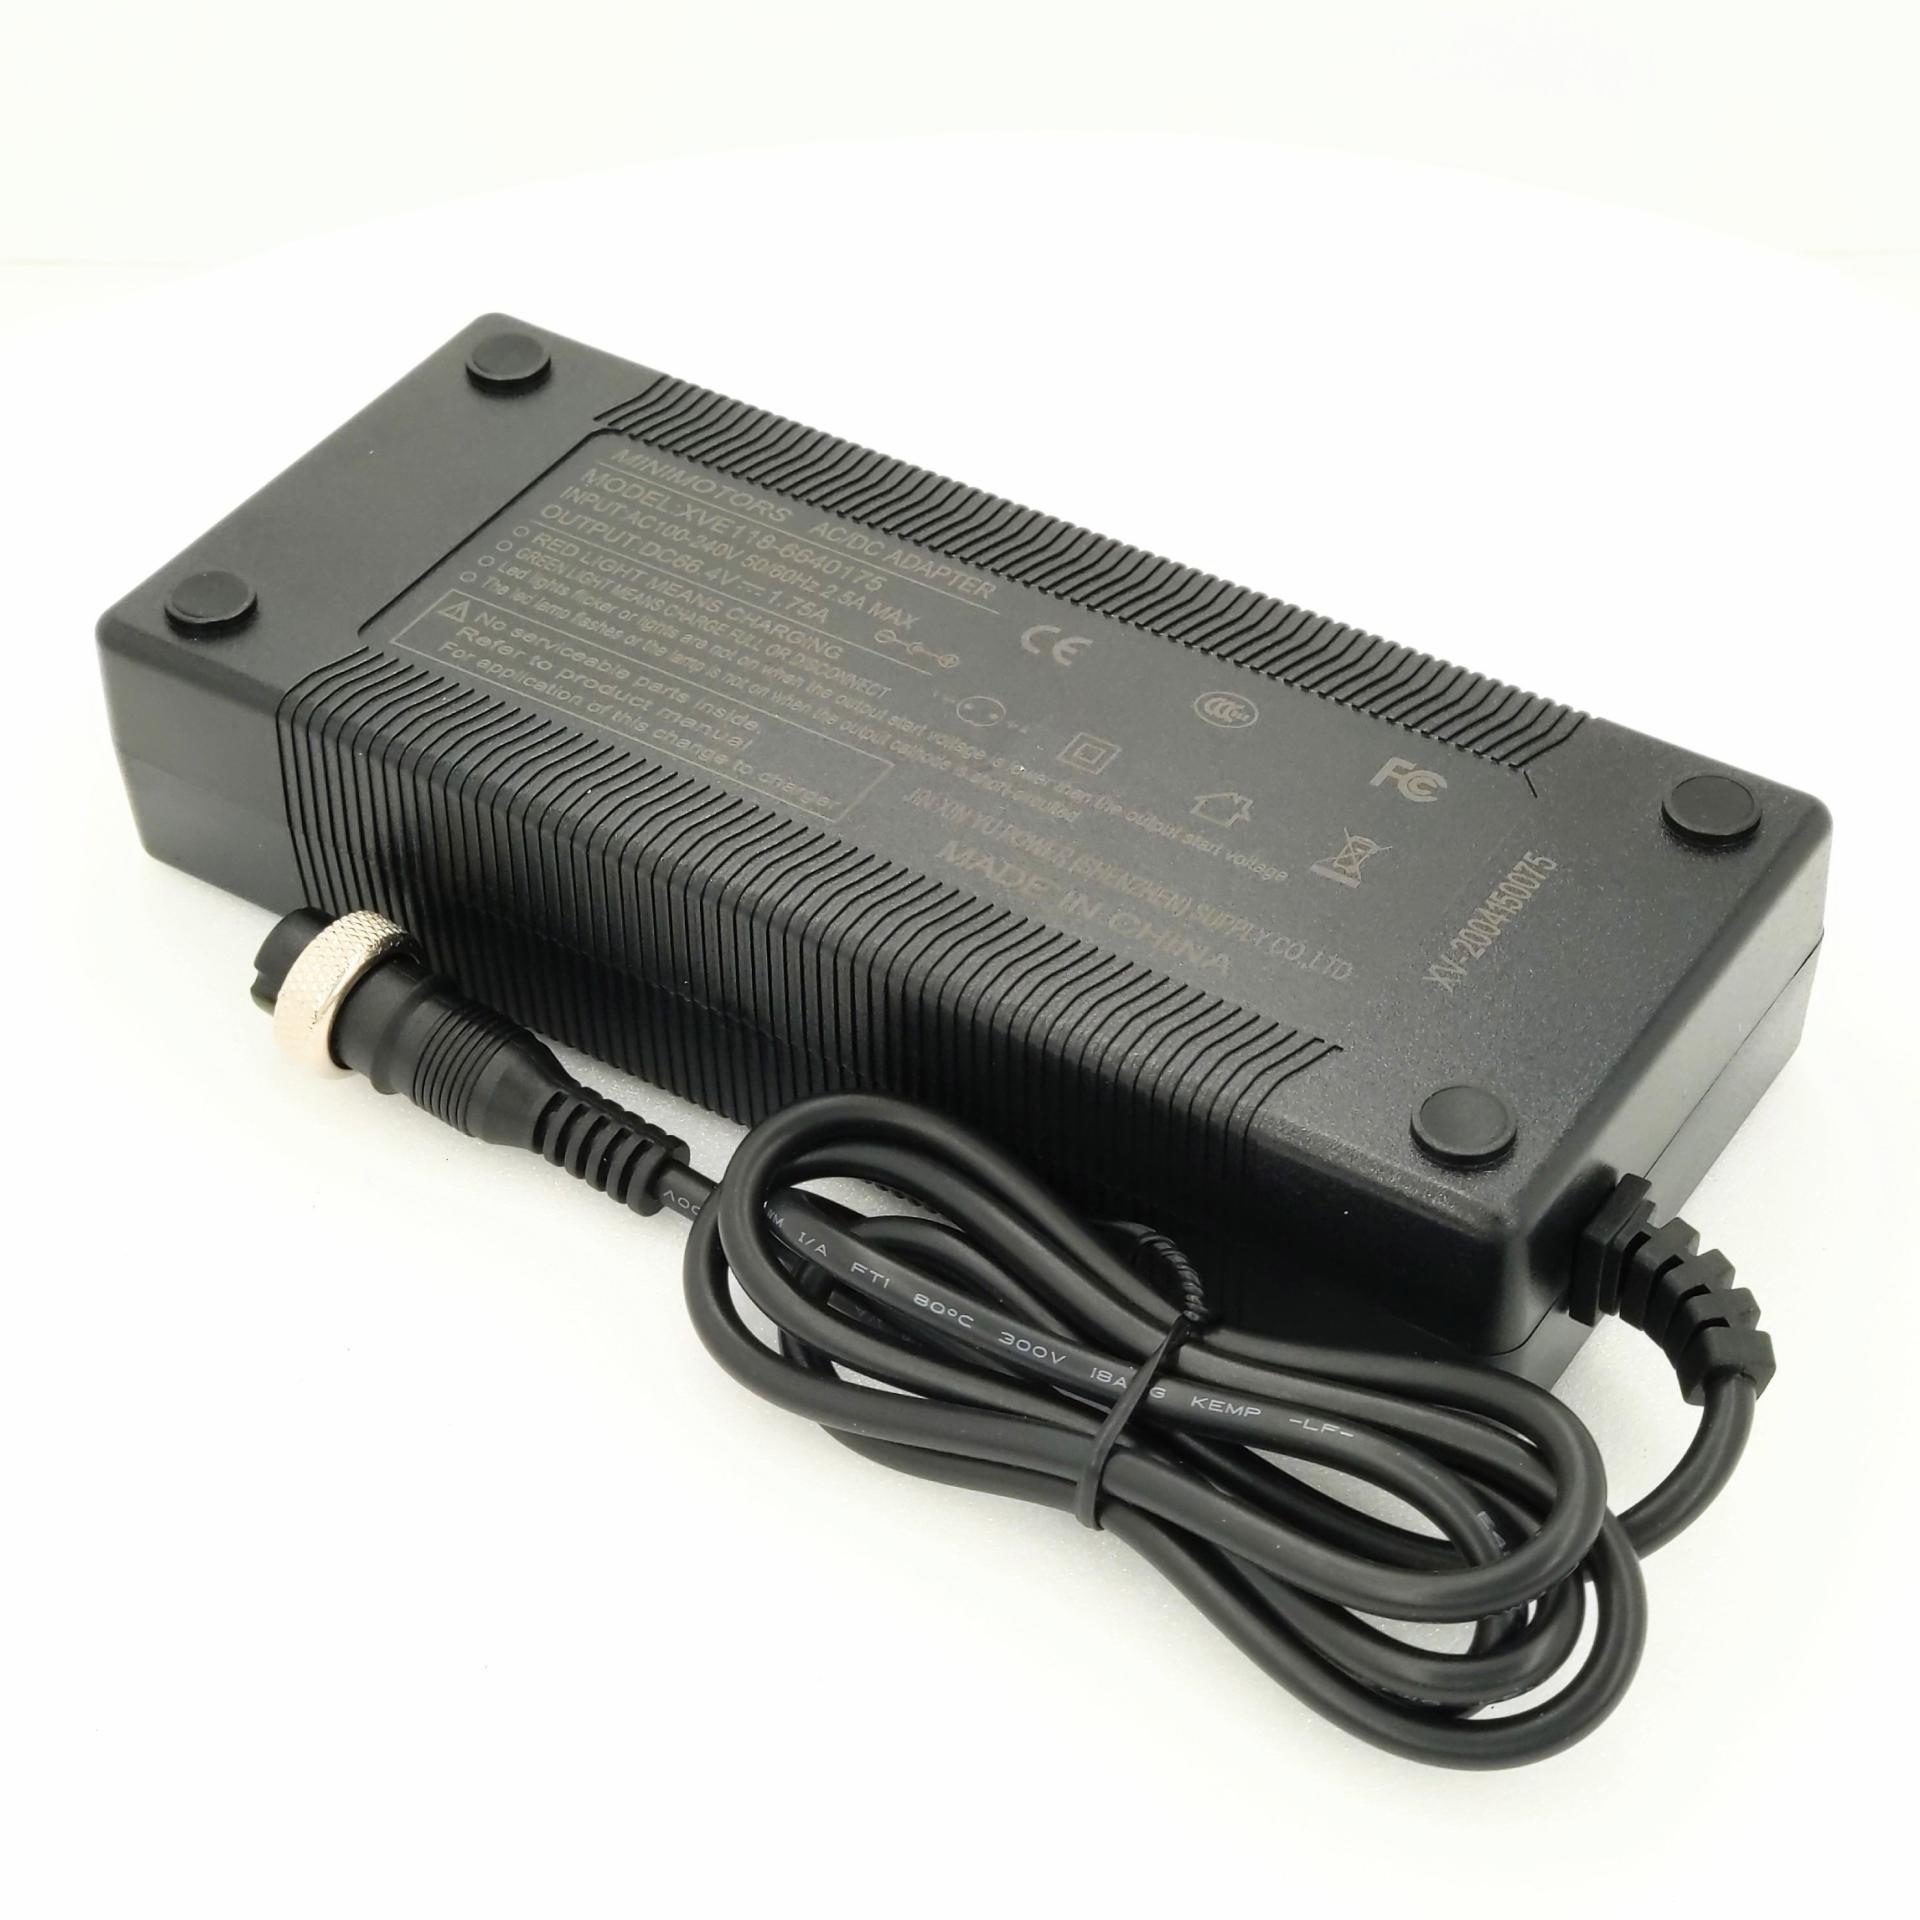 60V 1.75A Slow Charger for Dualtron X, 66.4V Max, 2 Pin